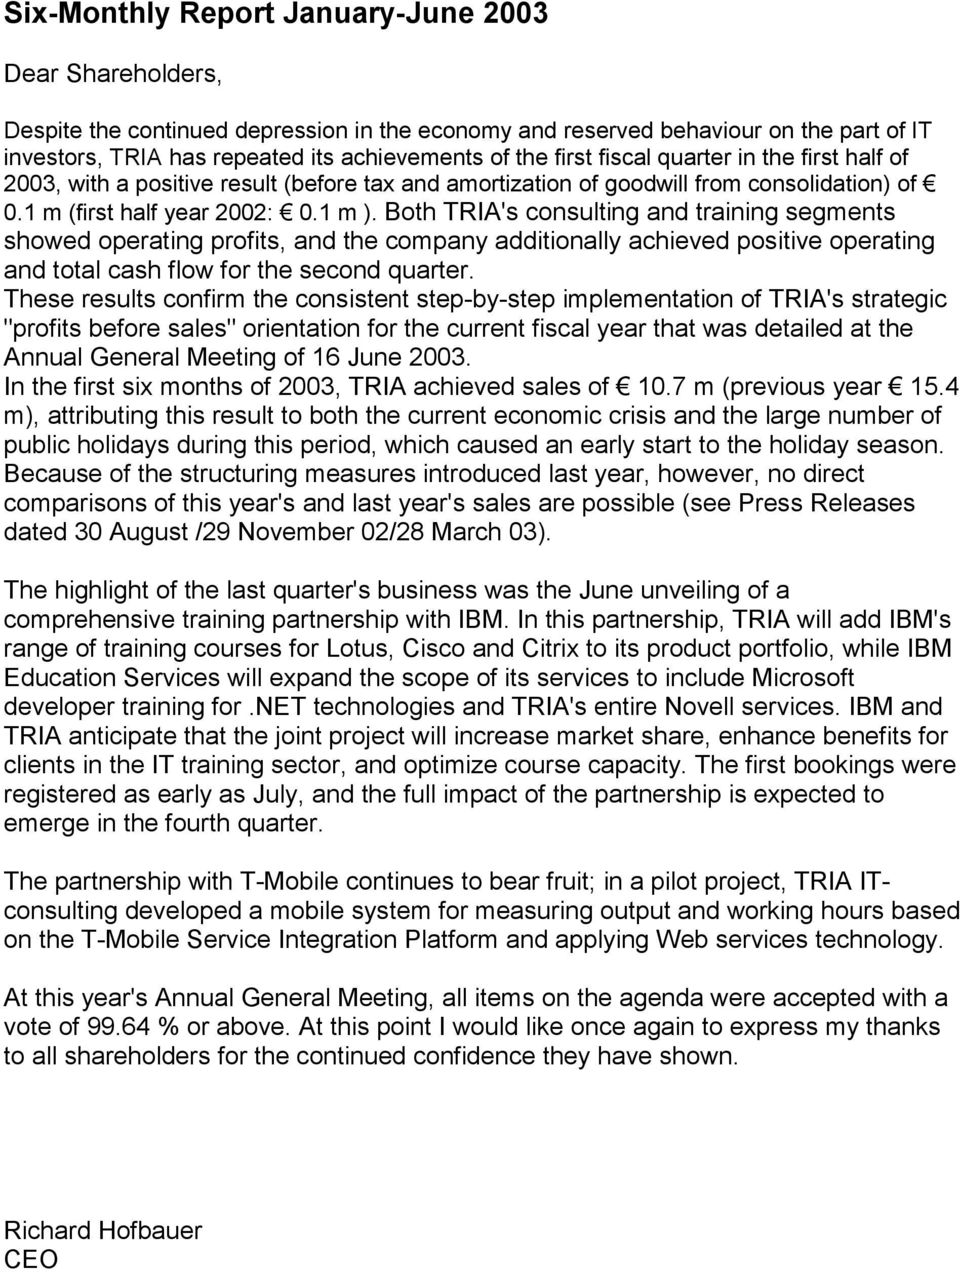 Both TRIA's consulting and training segments showed operating profits, and the company additionally achieved positive operating and total cash flow for the second quarter.